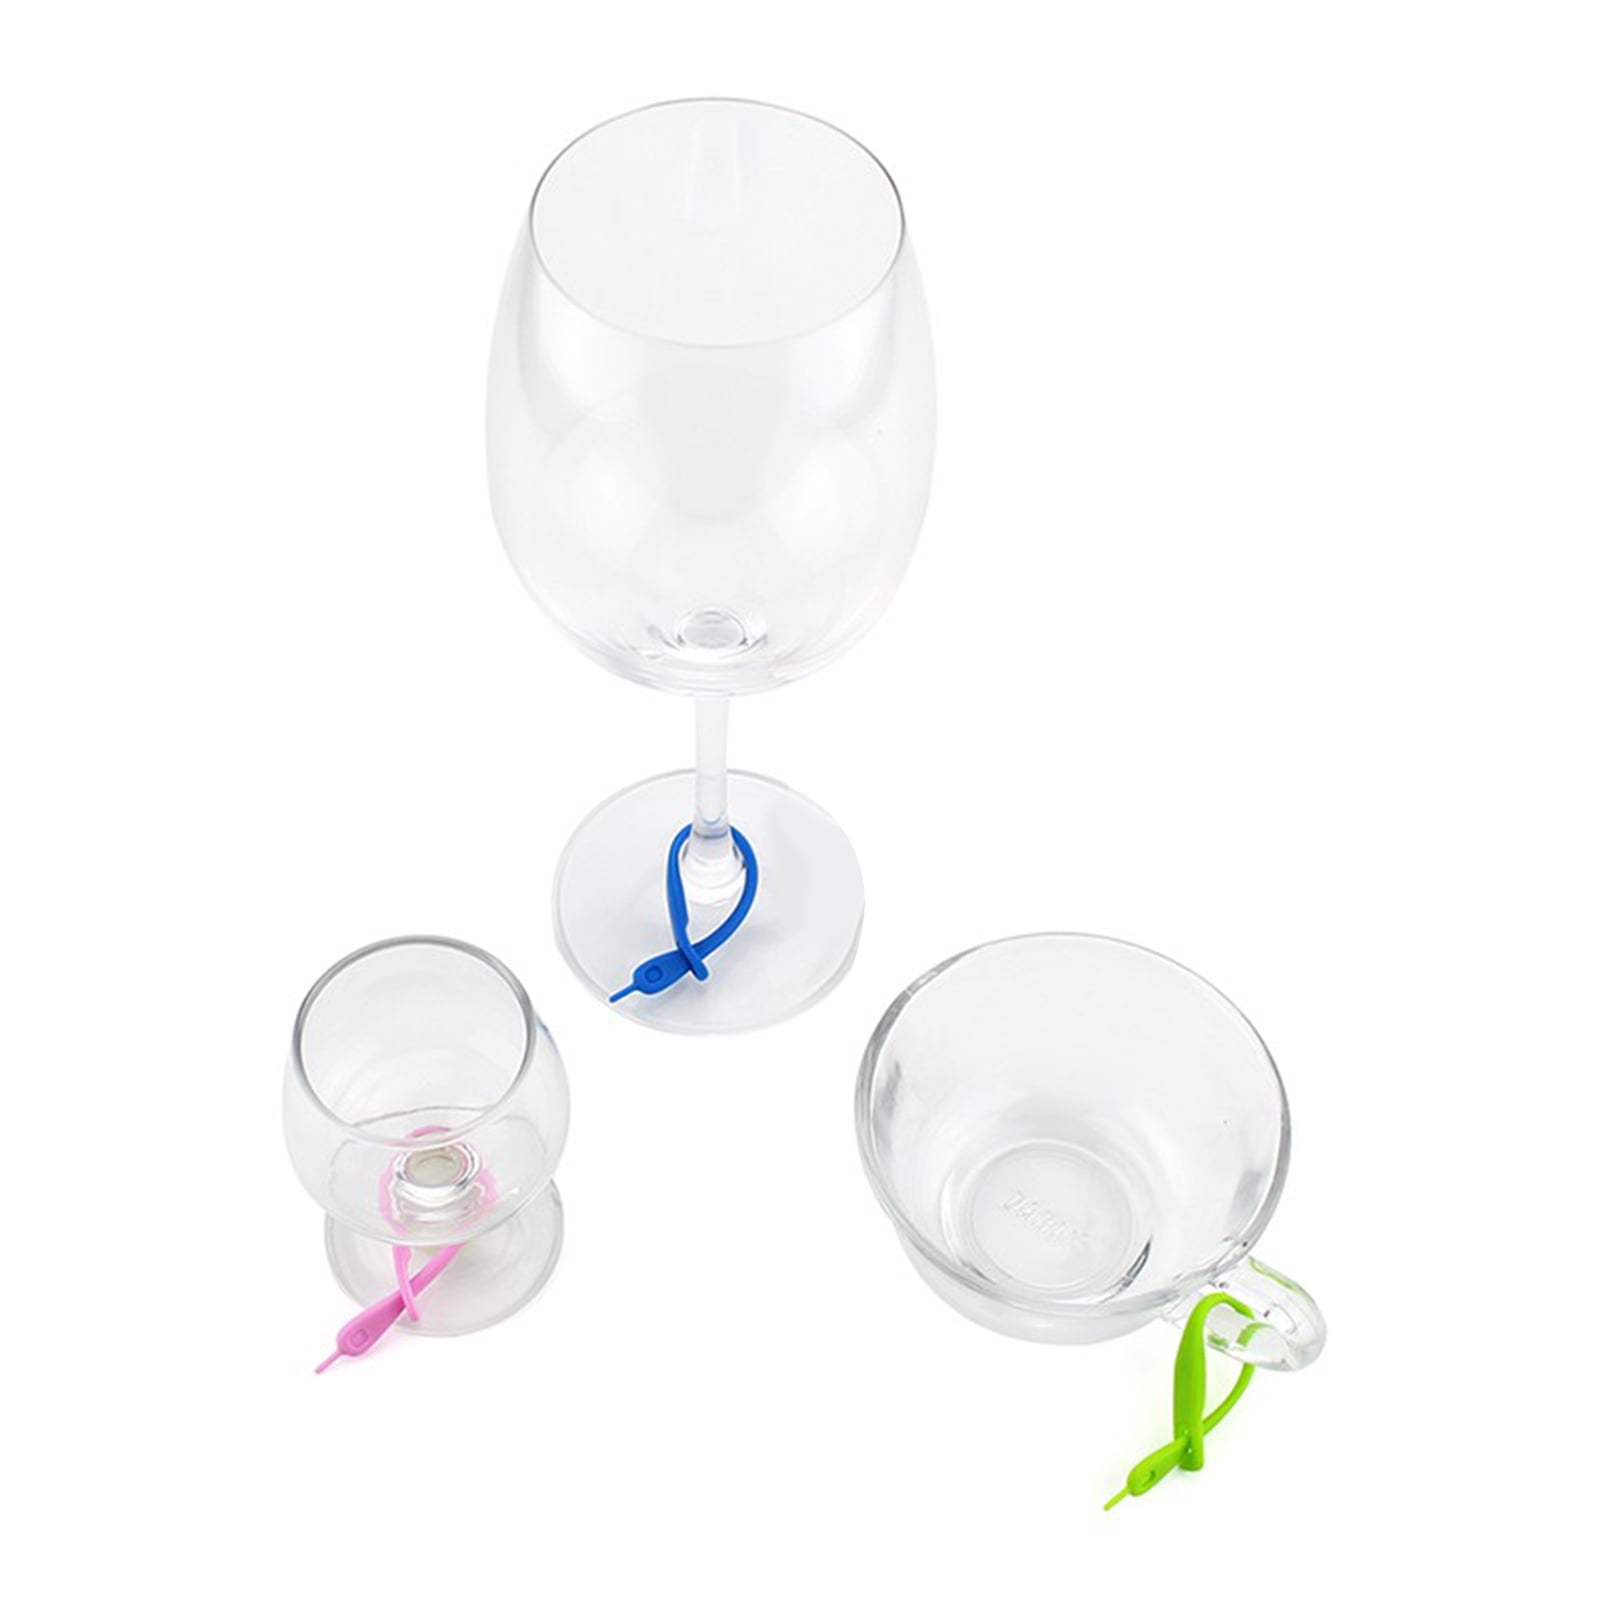 Danesco 6601209 Set of Four Silicone Wine Charms 